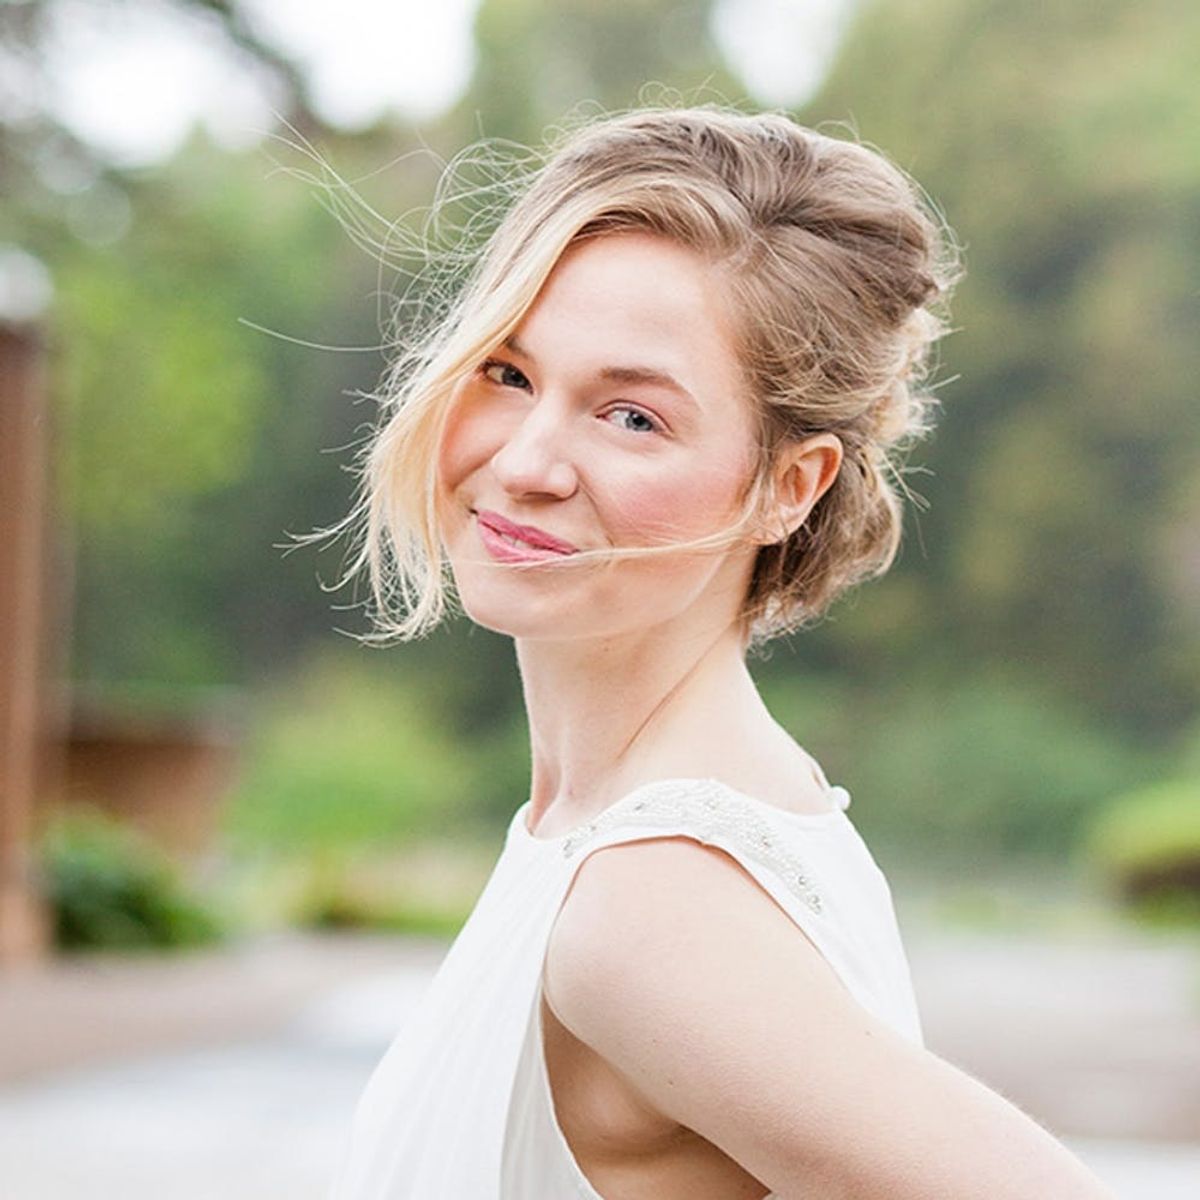 This Natural, Minimalist Makeup Look Is Perfect for Your Wedding Day